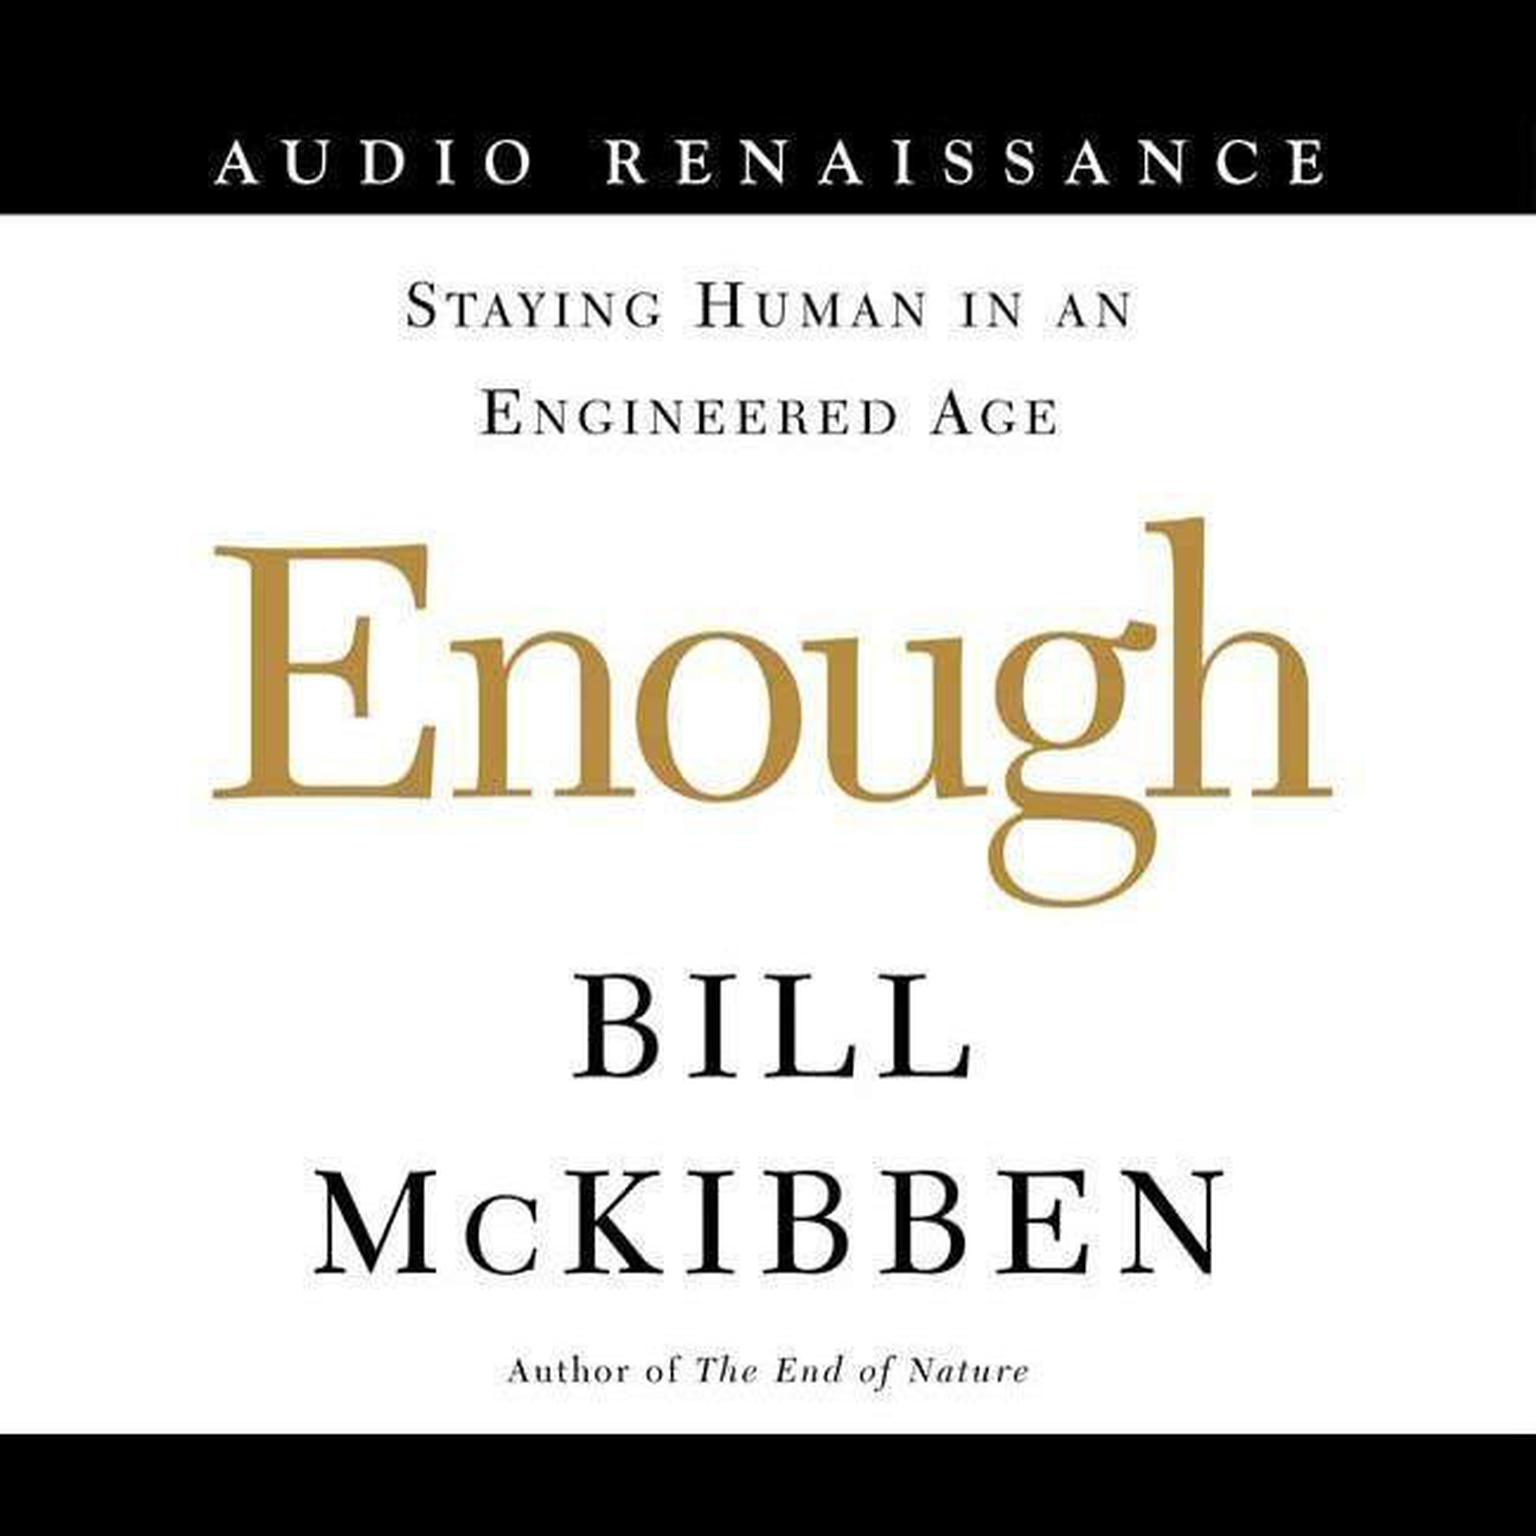 Enough (Abridged): Staying Human in an Engineered Age Audiobook, by Bill McKibben